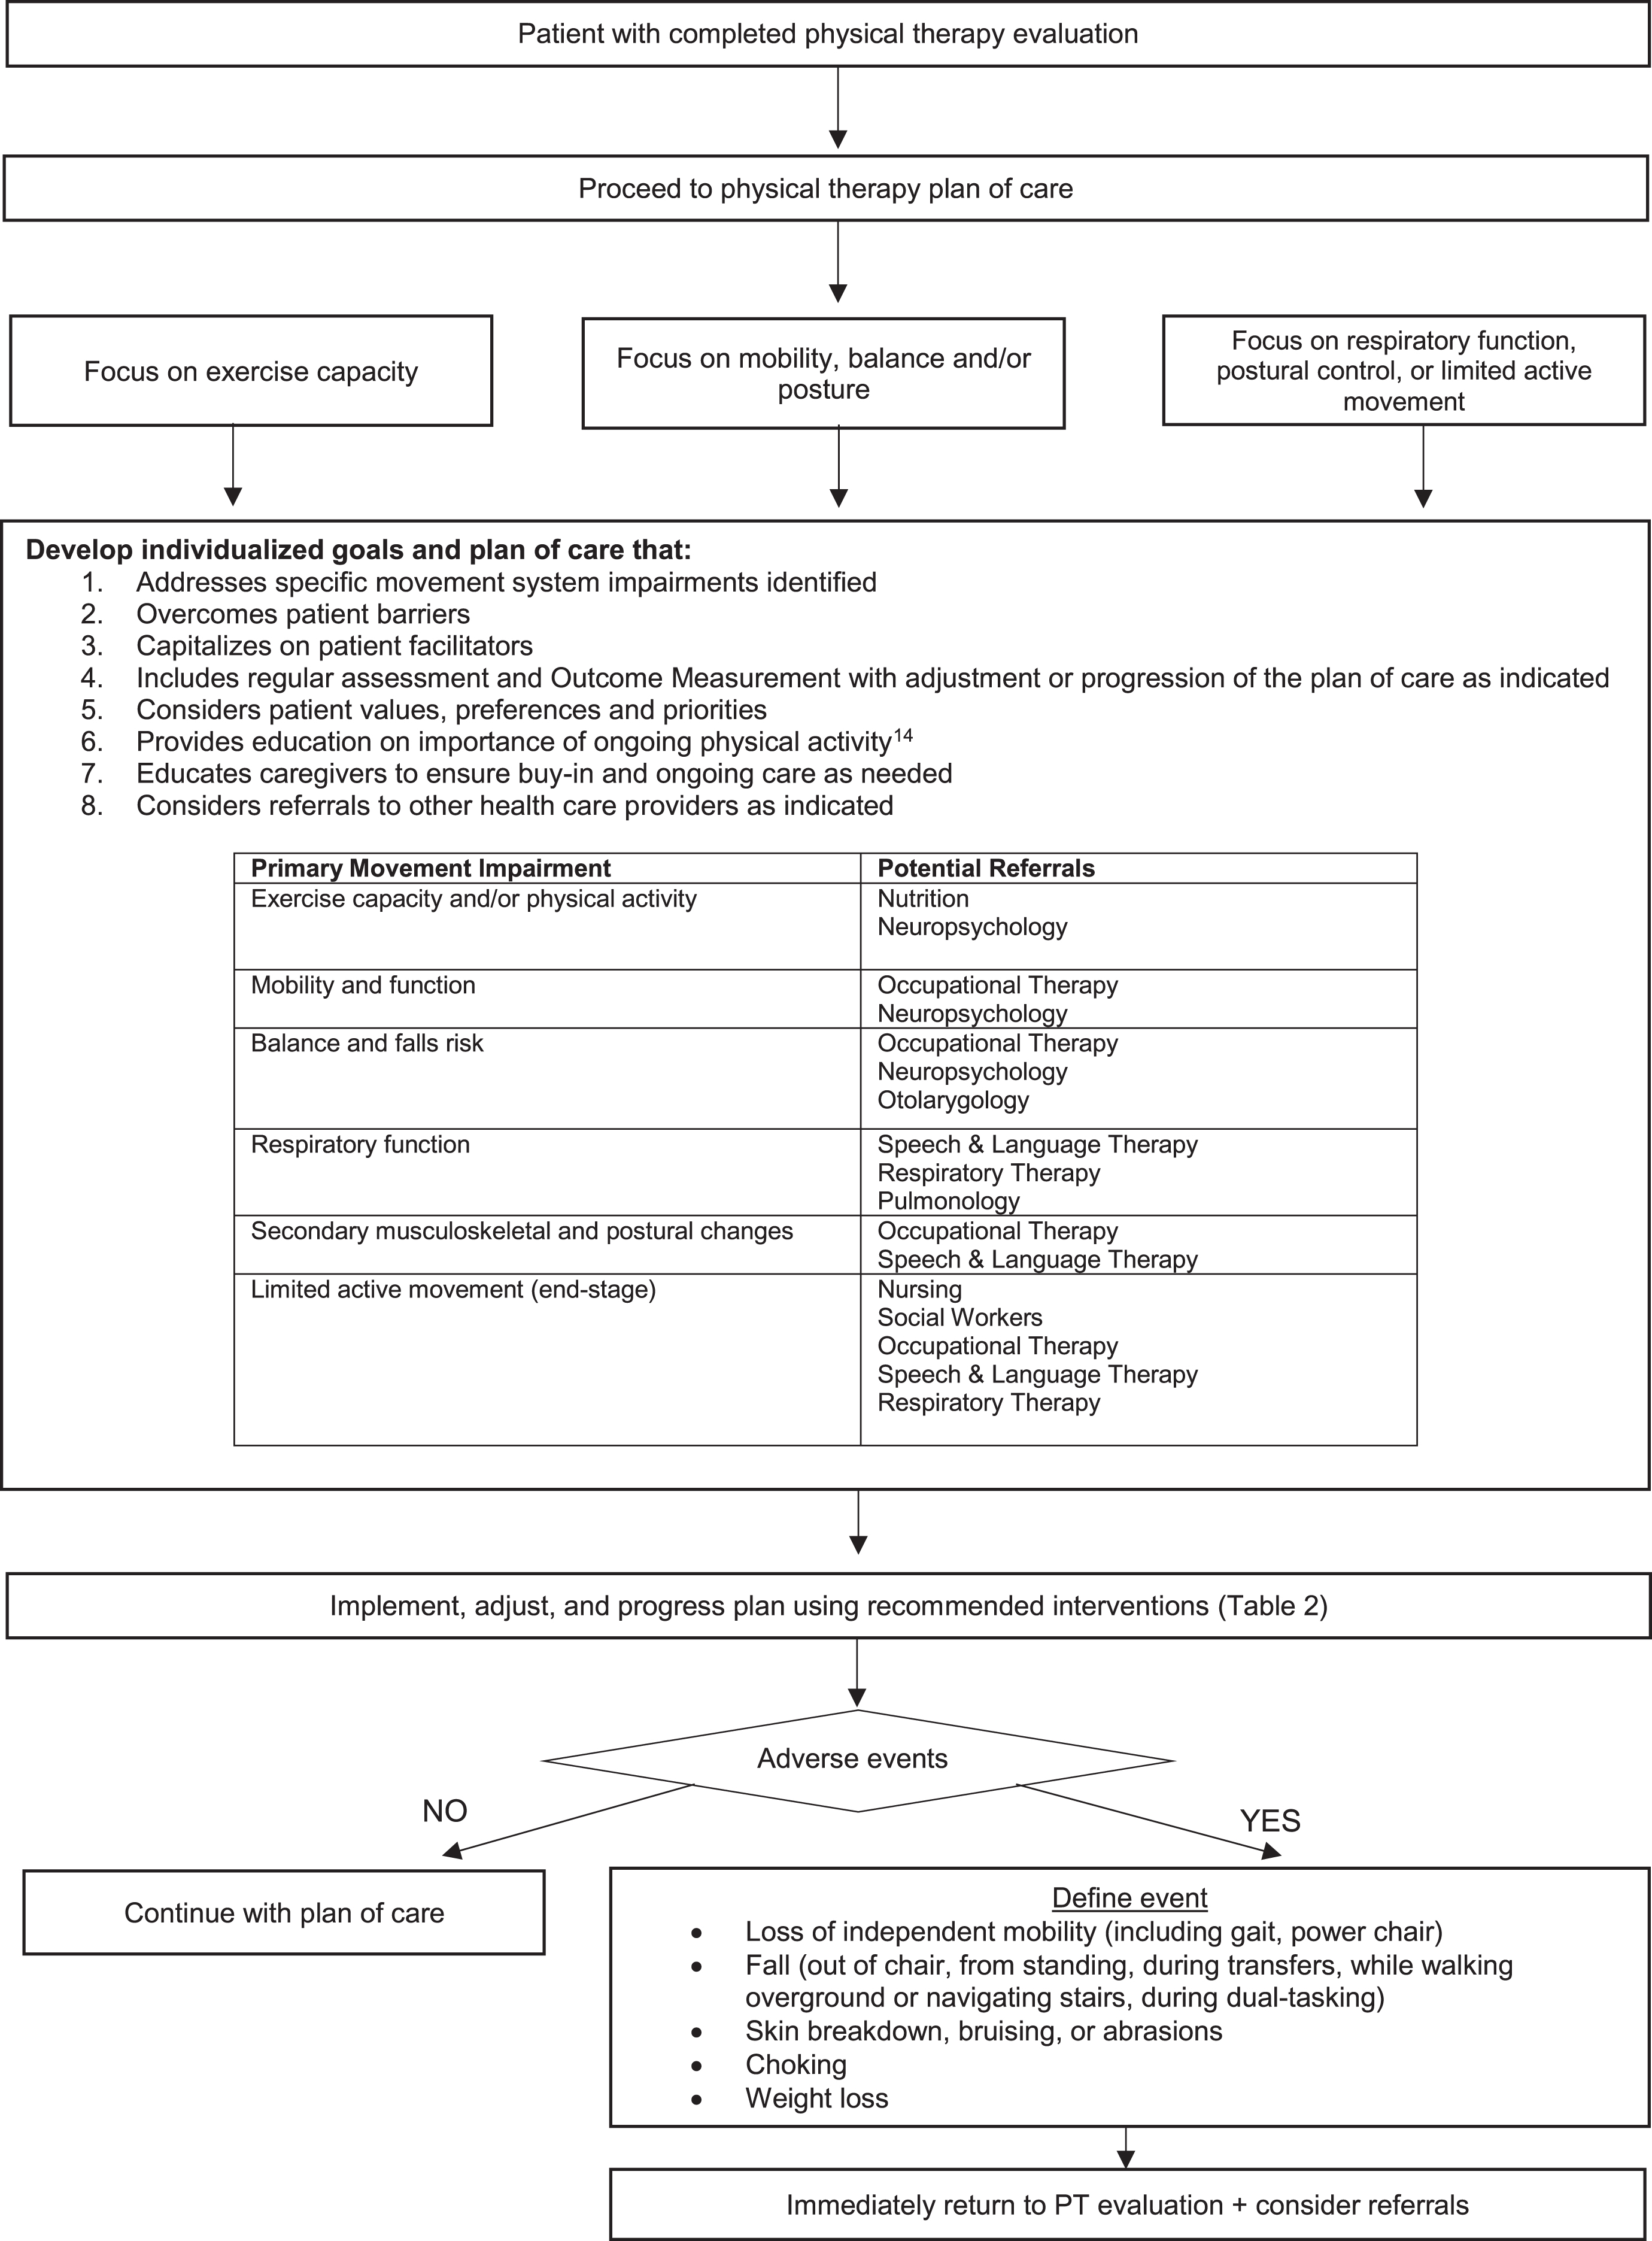 Physical Therapy Plan of Care Decision Tree. This figure presents a recommended algorithm for physical therapists to follow in their development of a plan of care for a person with Huntington’s disease.